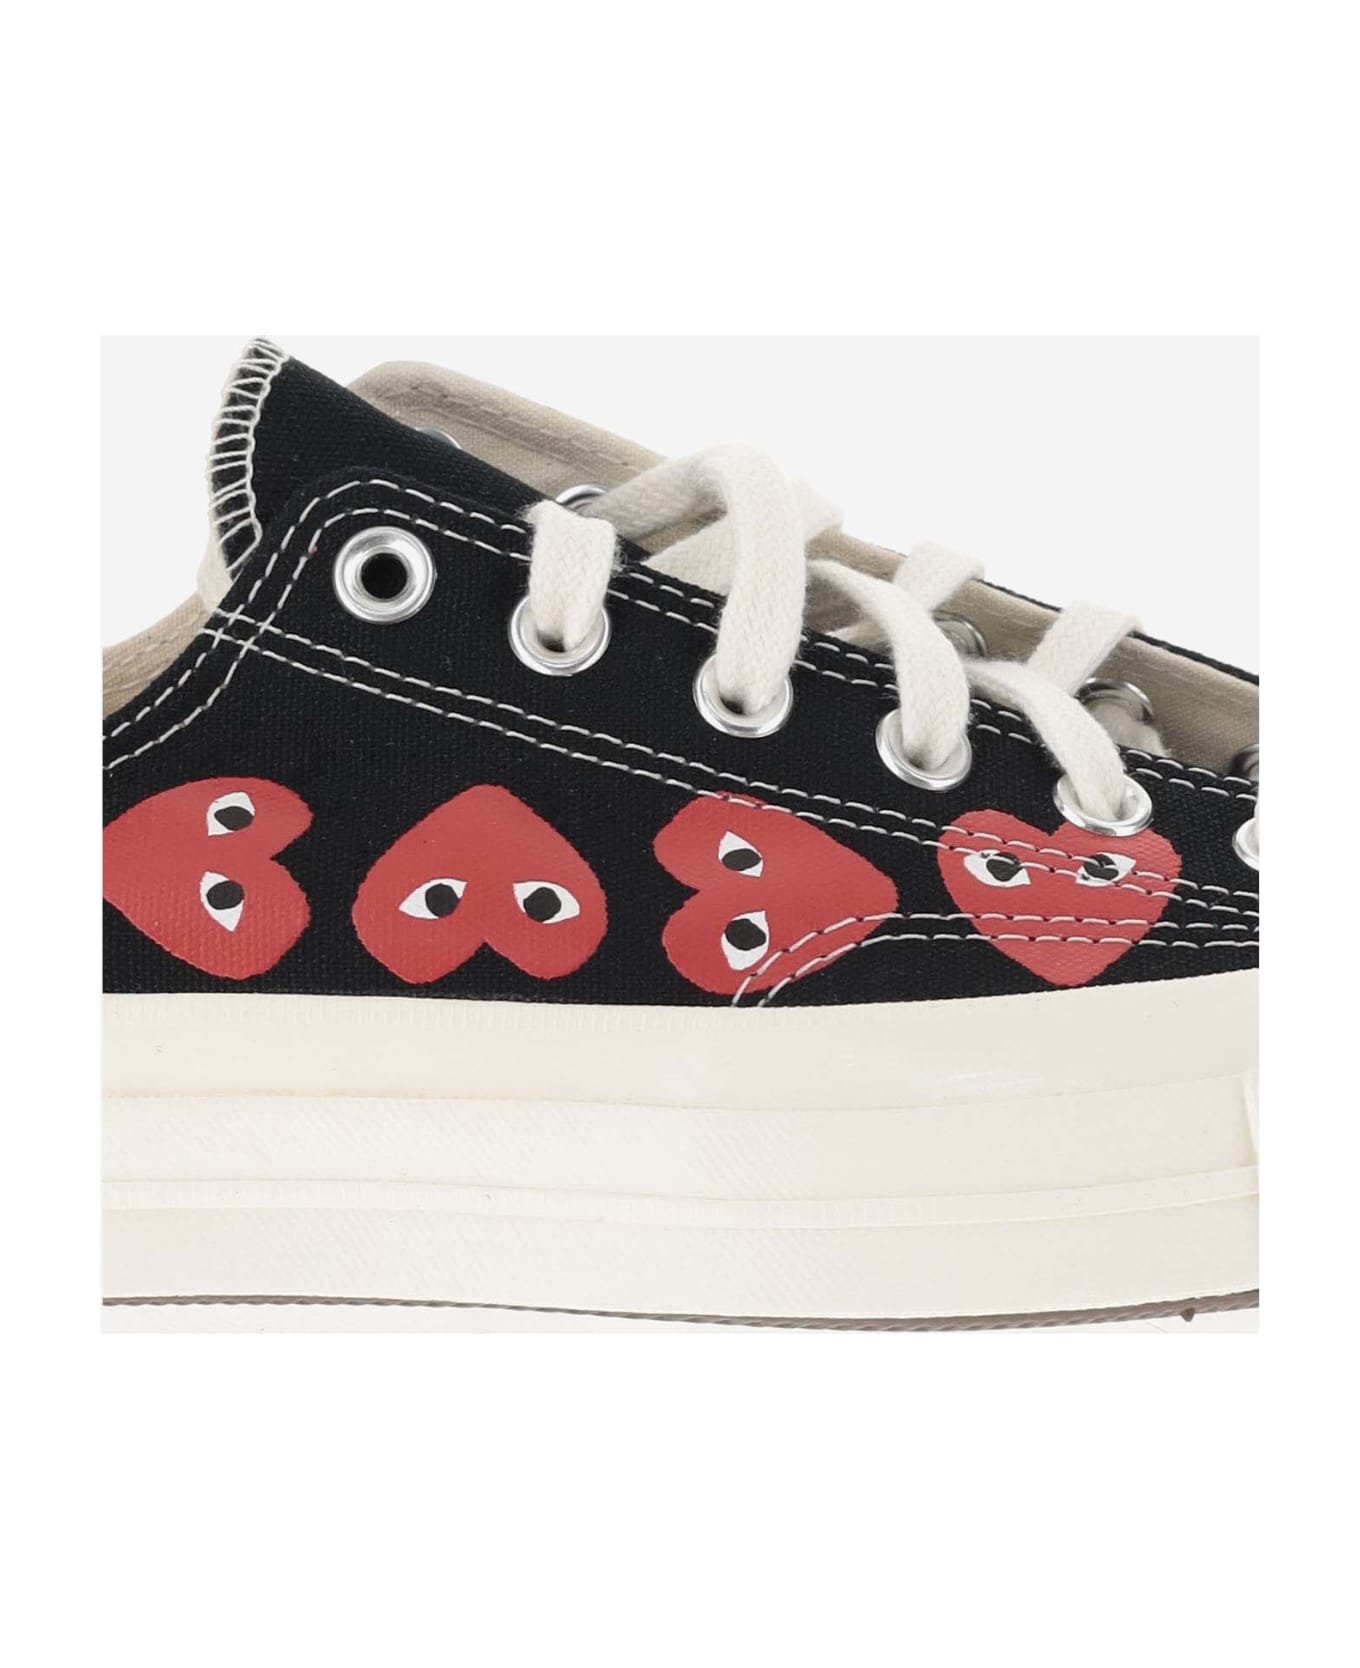 slipped on a set of calf-high brown boots Converse X Comme Des Garçons Play Chuck 70 Sneakers - Black